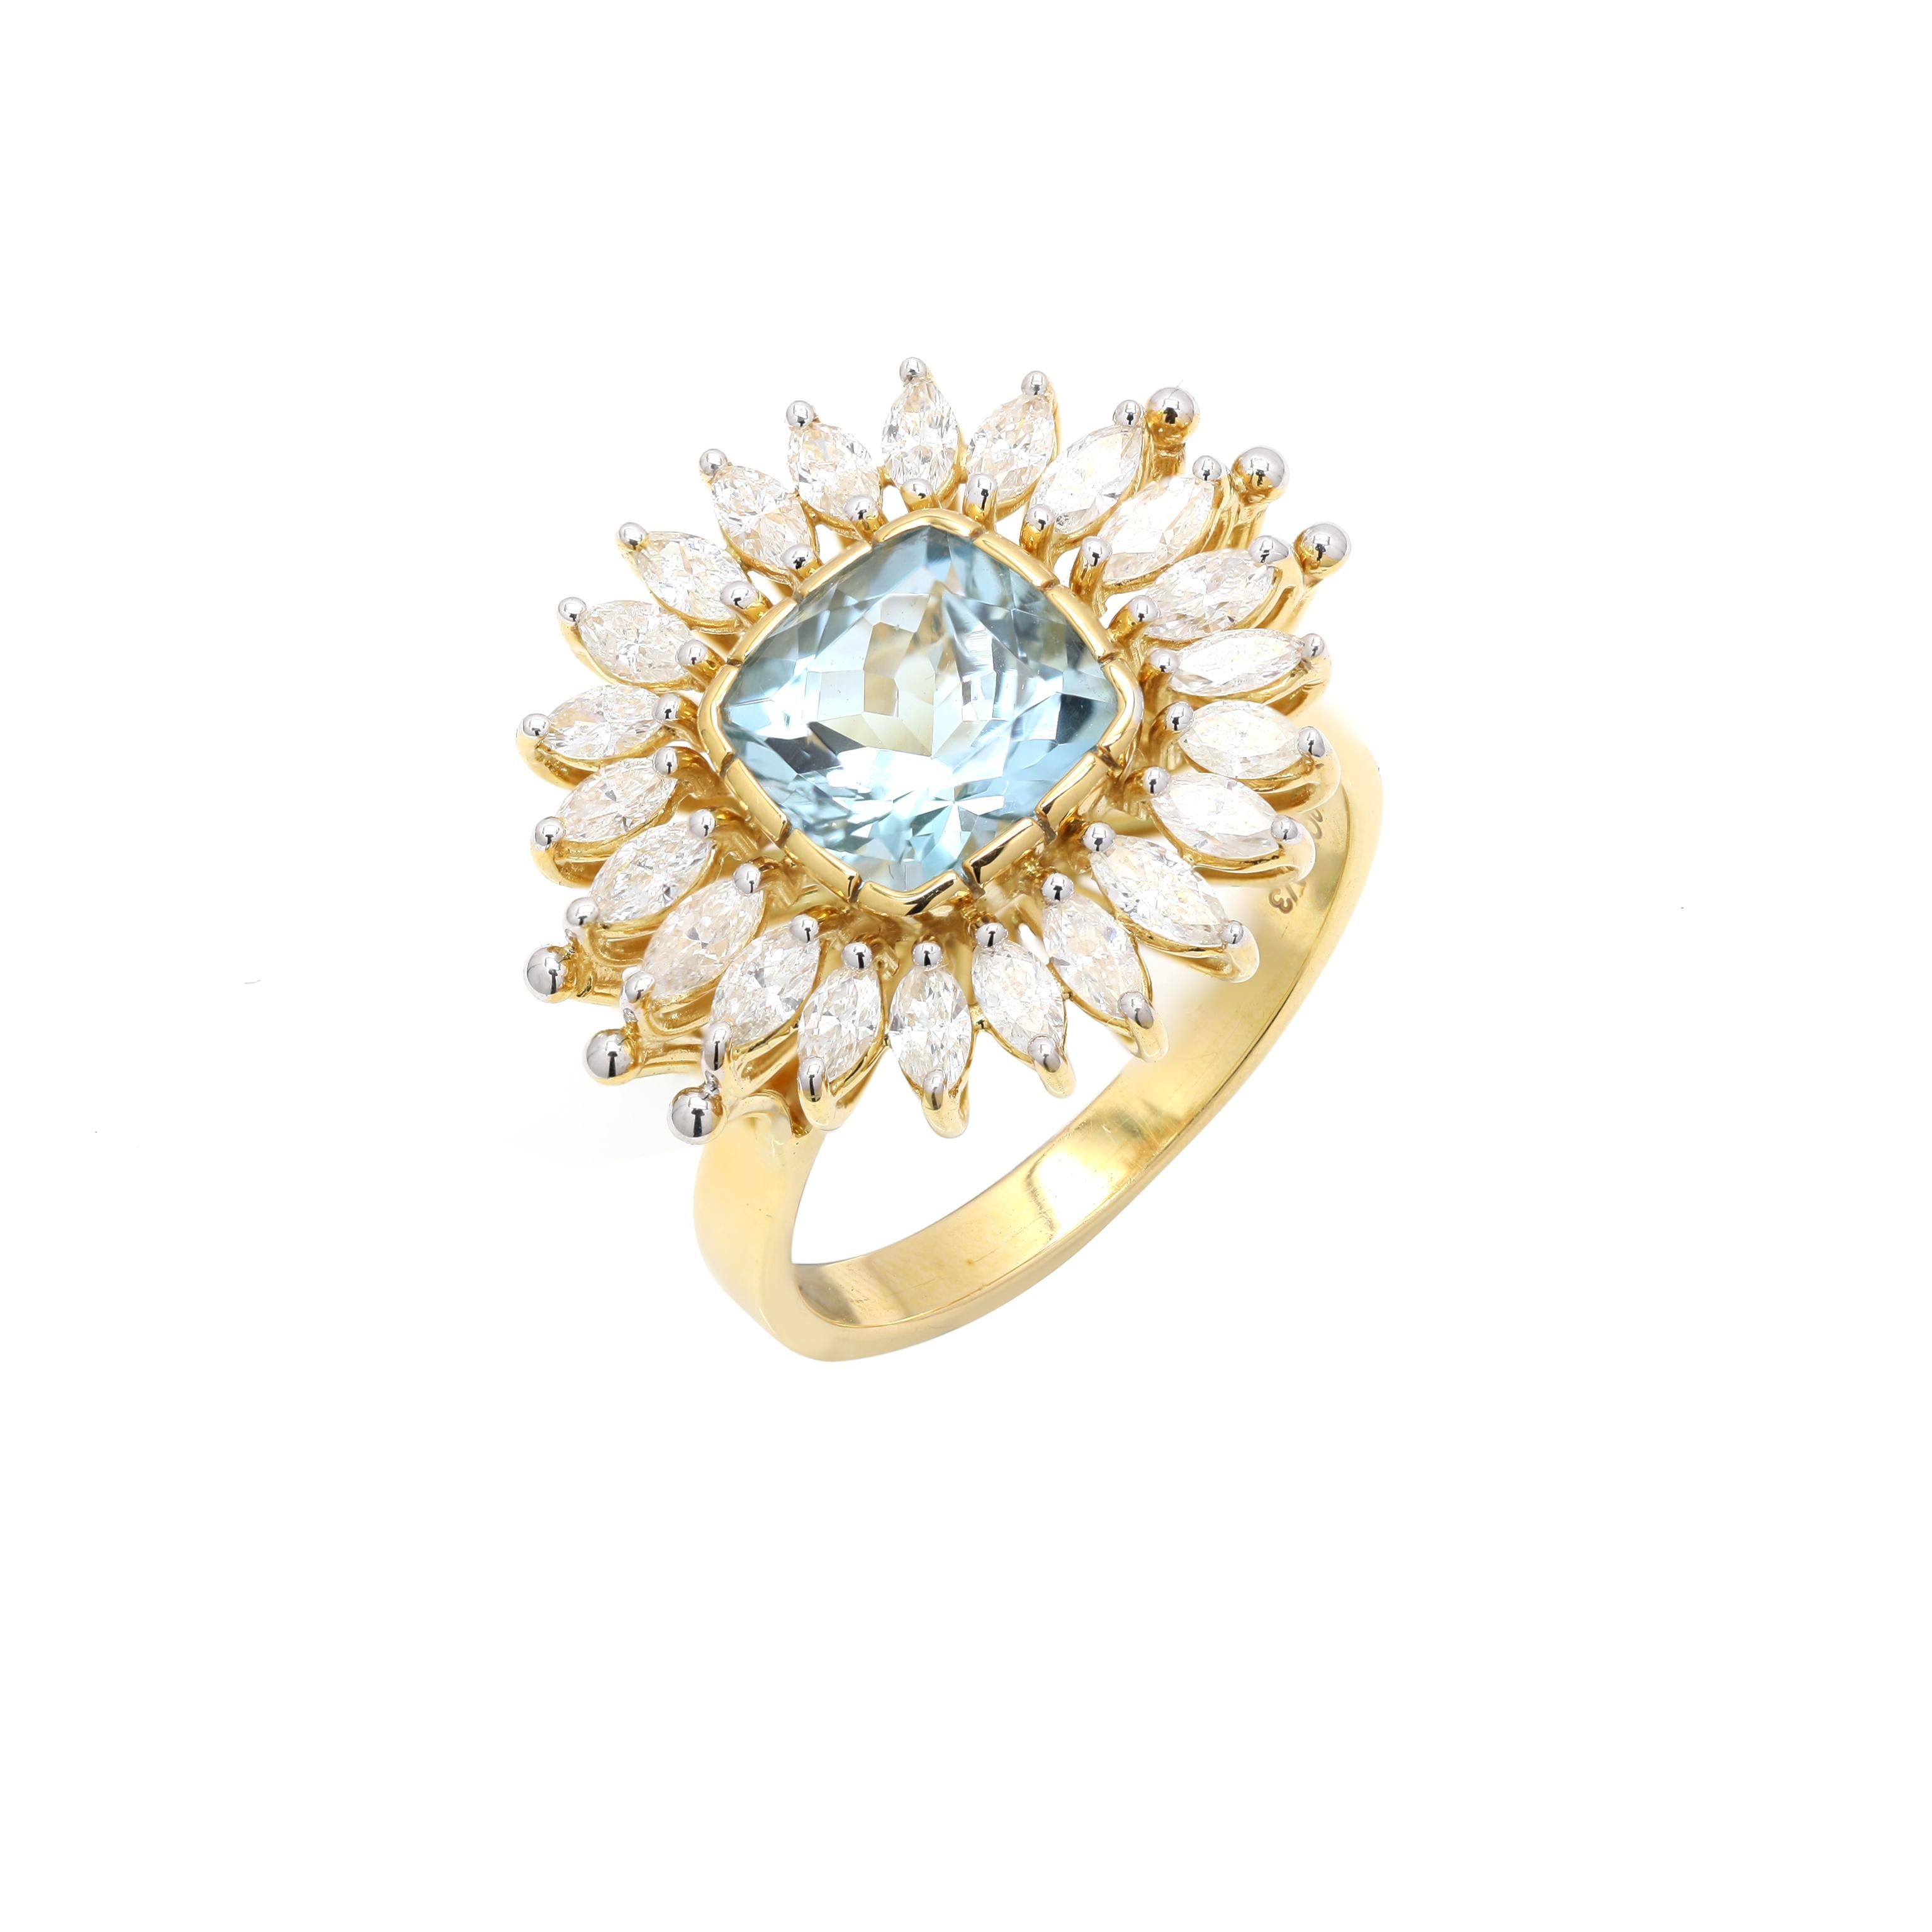 For Sale:   1.25 ct Diamond 3.6 ct Aquamarine Cocktail Ring in 18K Yellow Gold 4